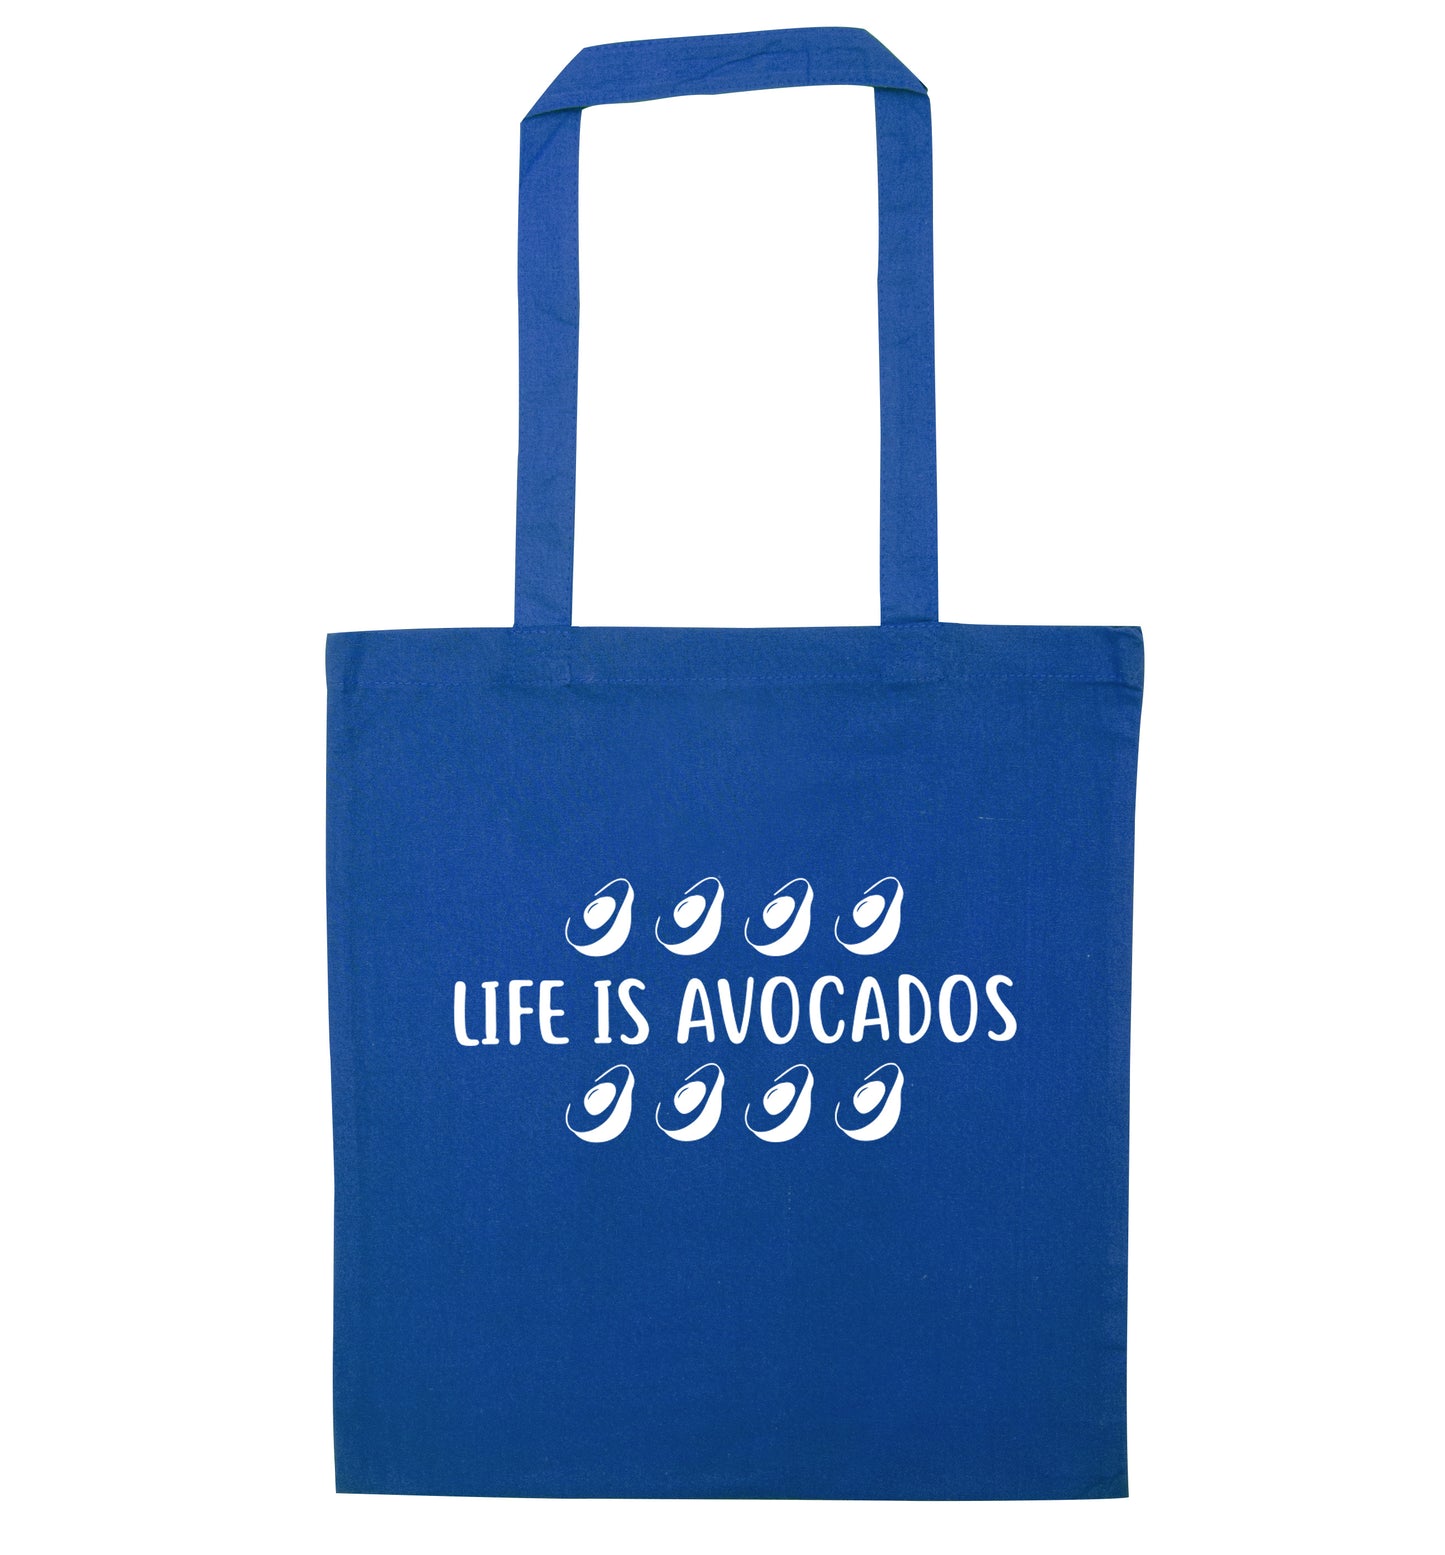 Life is avocados blue tote bag